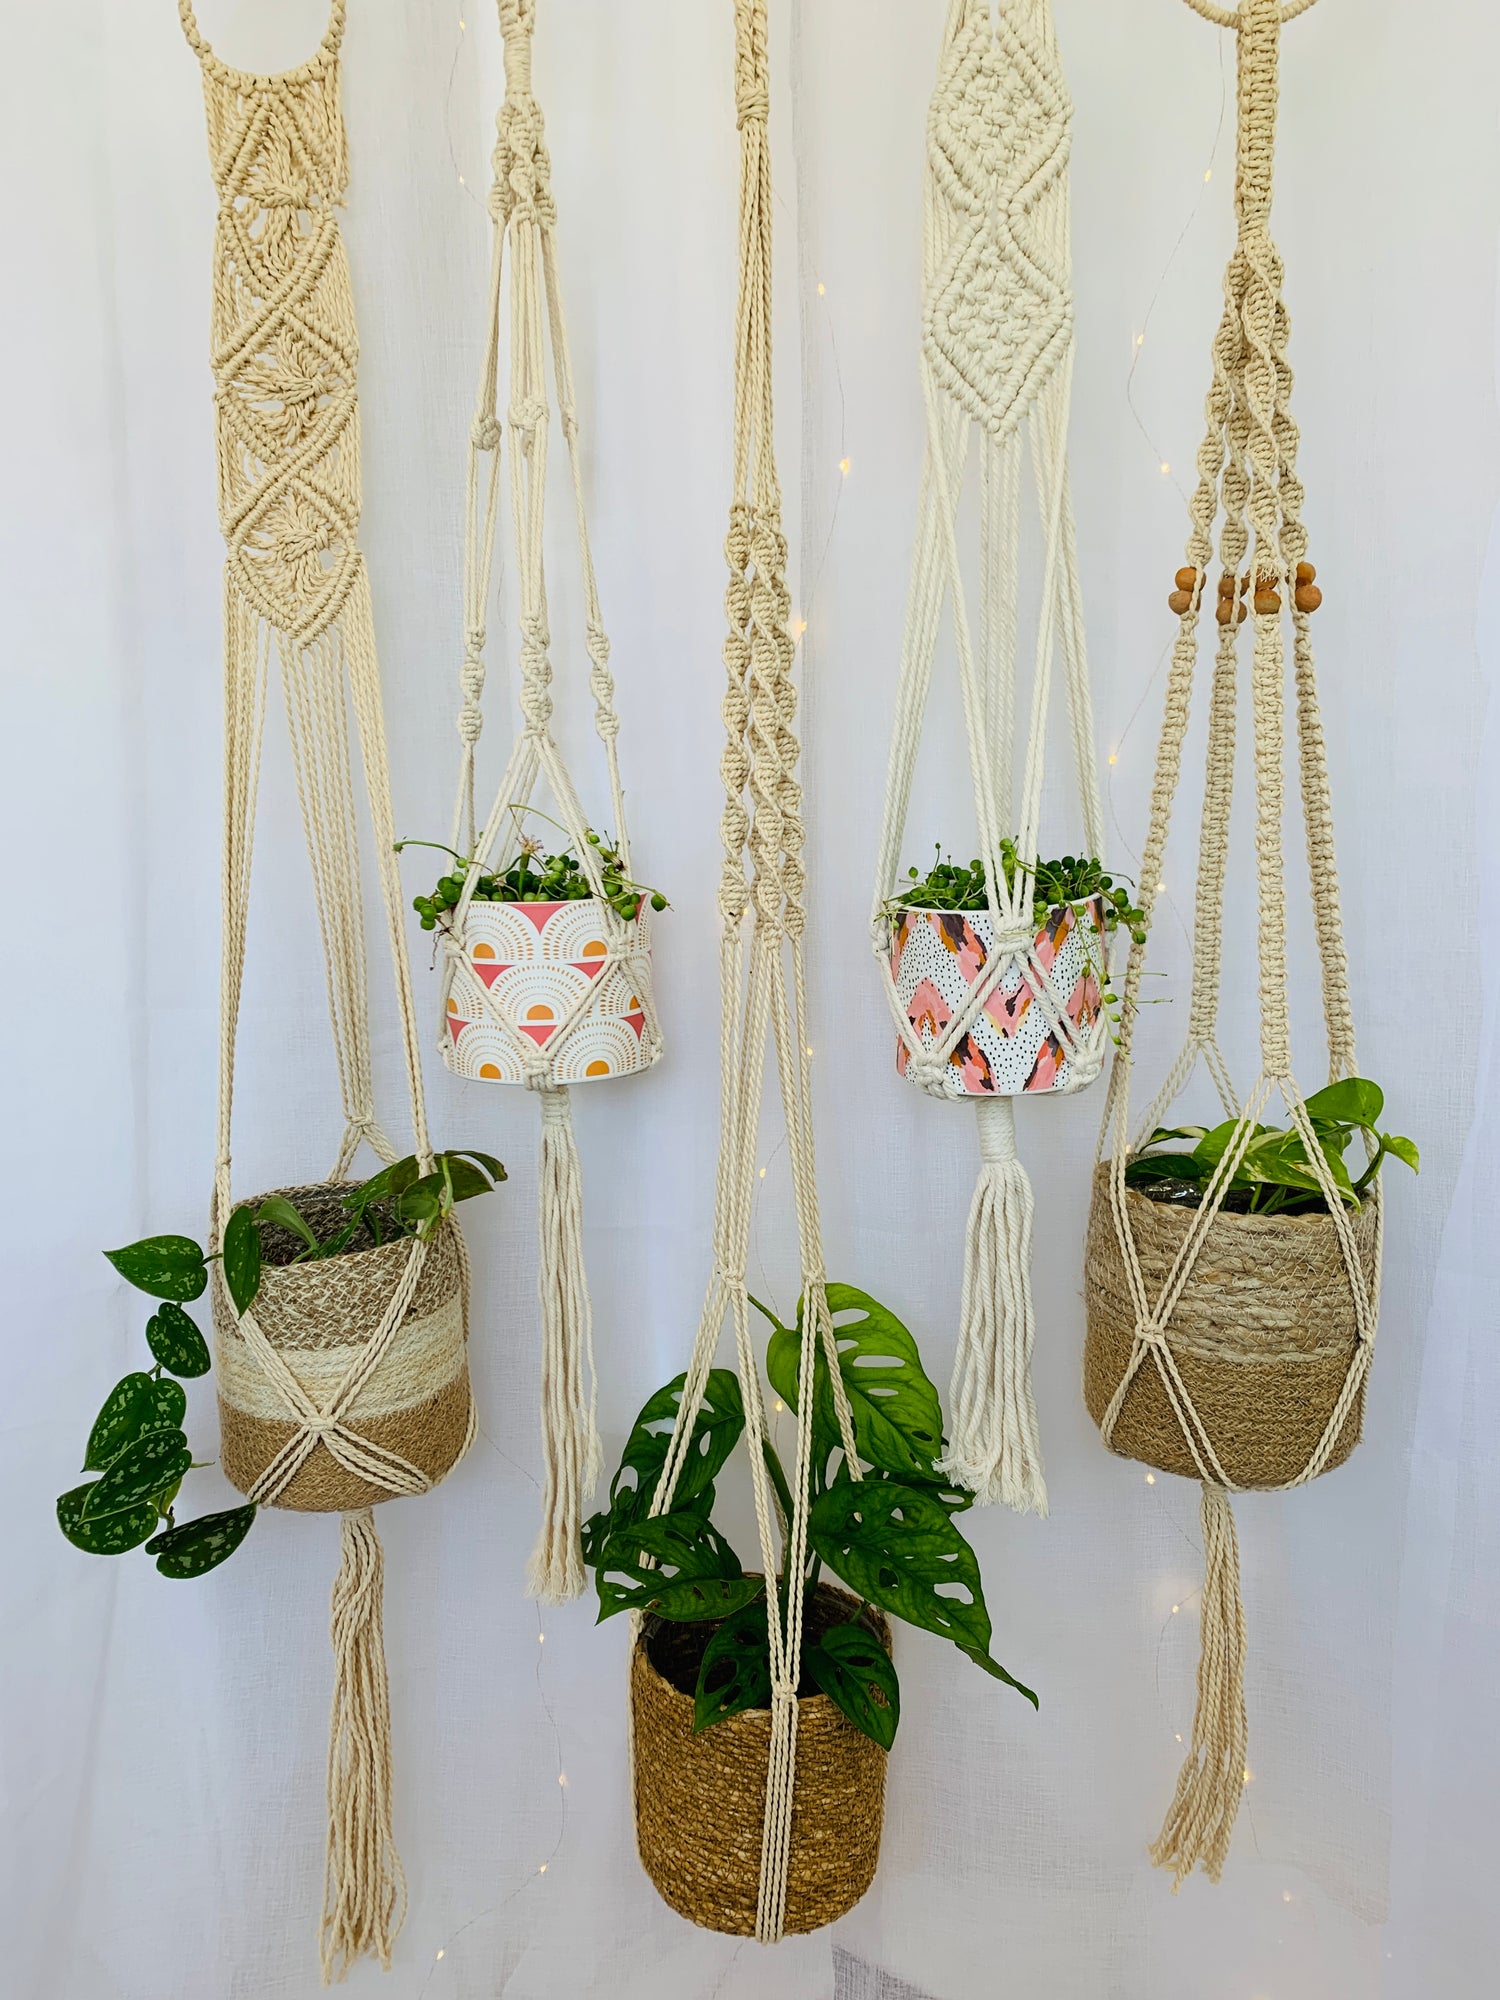 Hanging plants in Macramé plant hangers; Satin Pothos, Monstera Monkey Mask, Devils Ivy, String of Pearls. Ceramic pots and Jute hand woven pots.